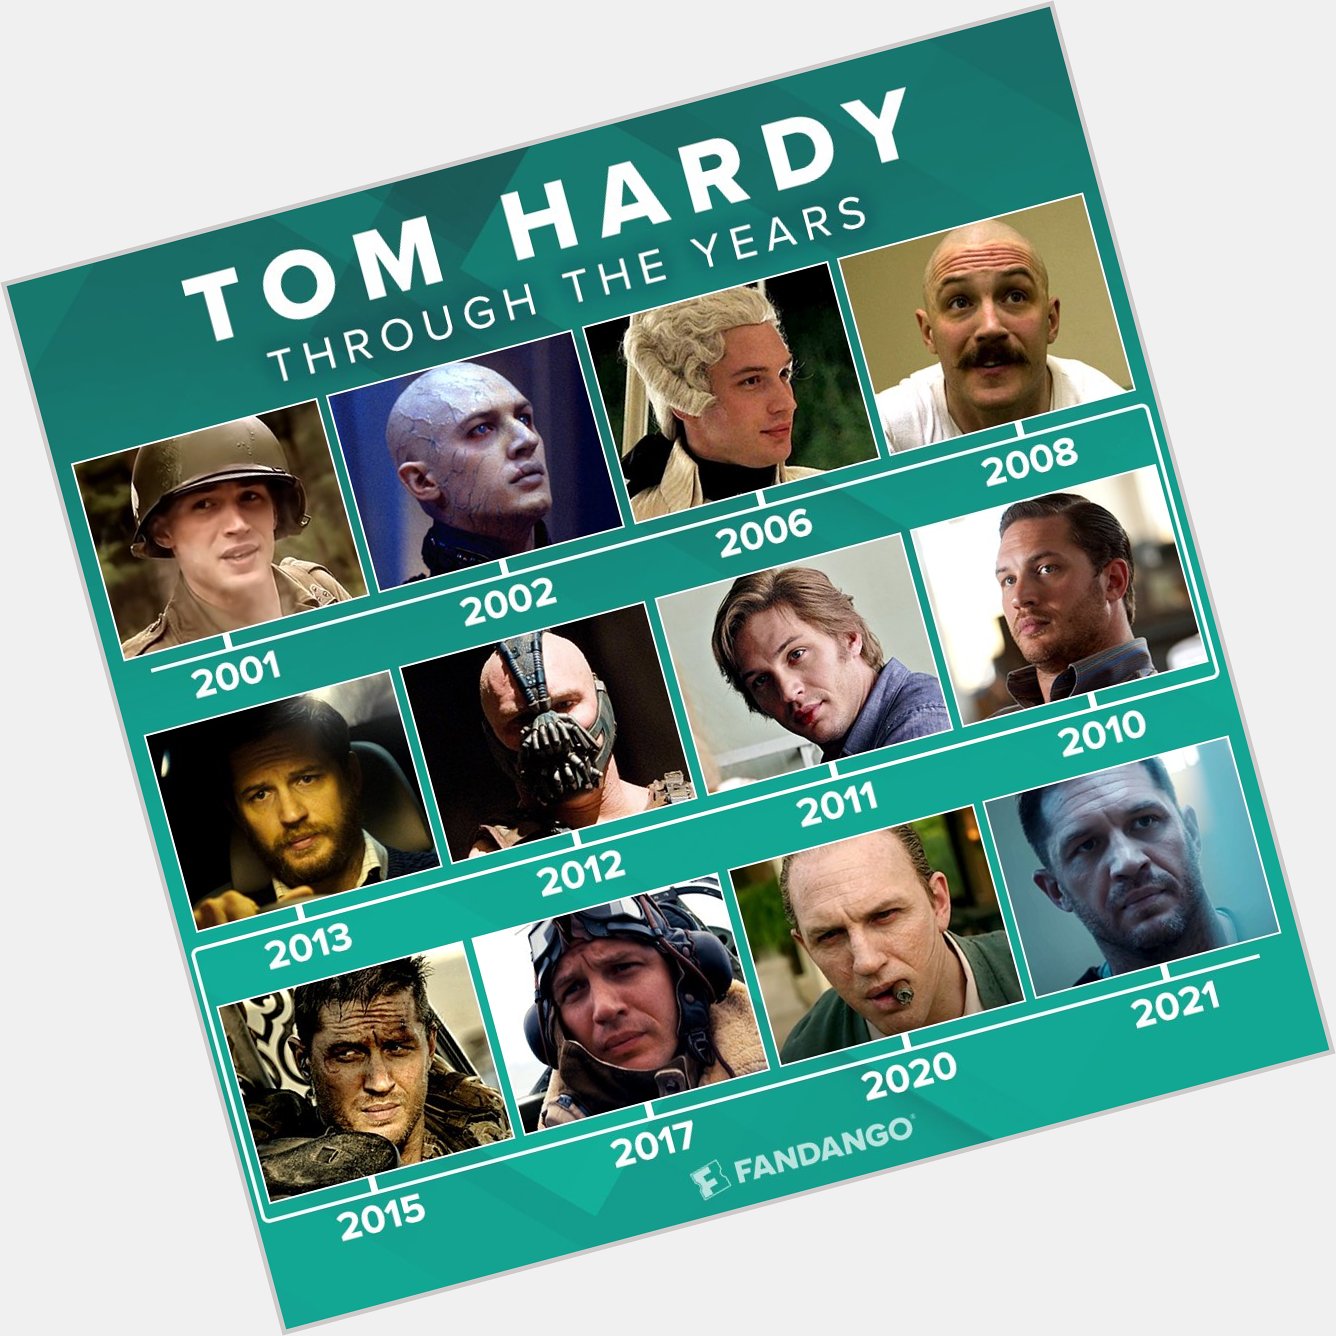 Happy 44th Birthday to Tom Hardy!

What\s your fave Tom Hardy mvs / role? 